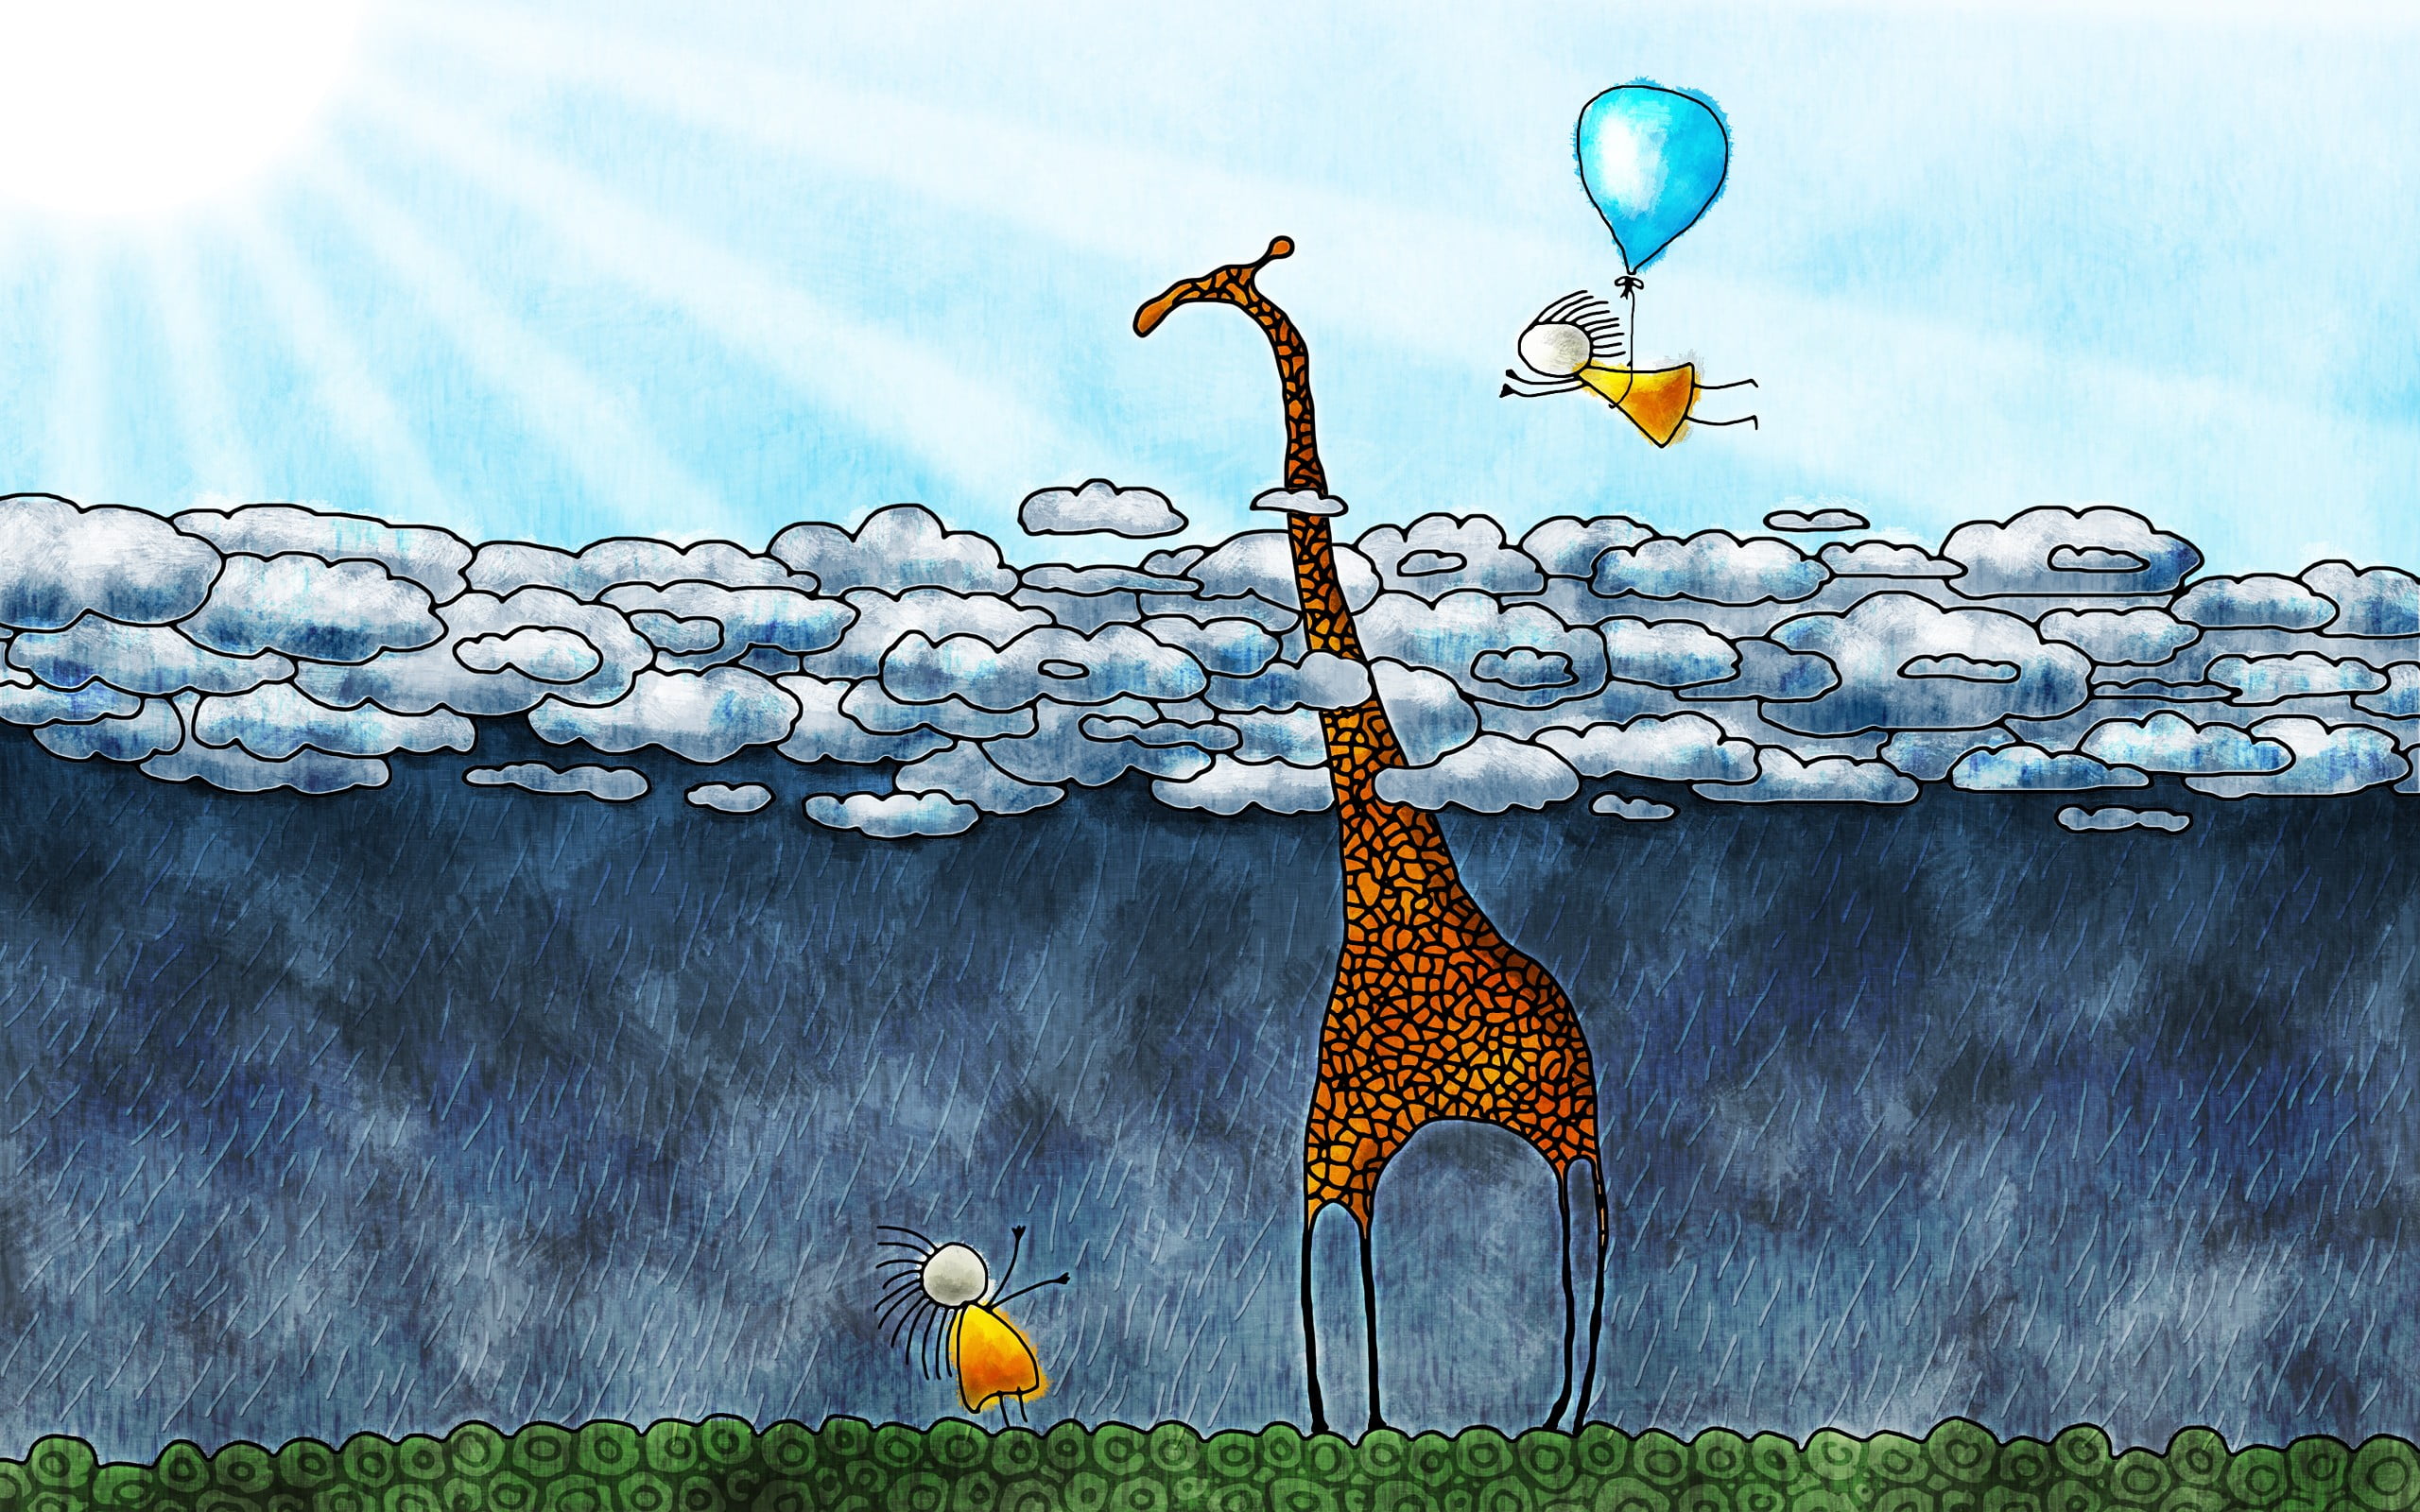 giraffe two boy and clouds painting, artwork, anime, balloon